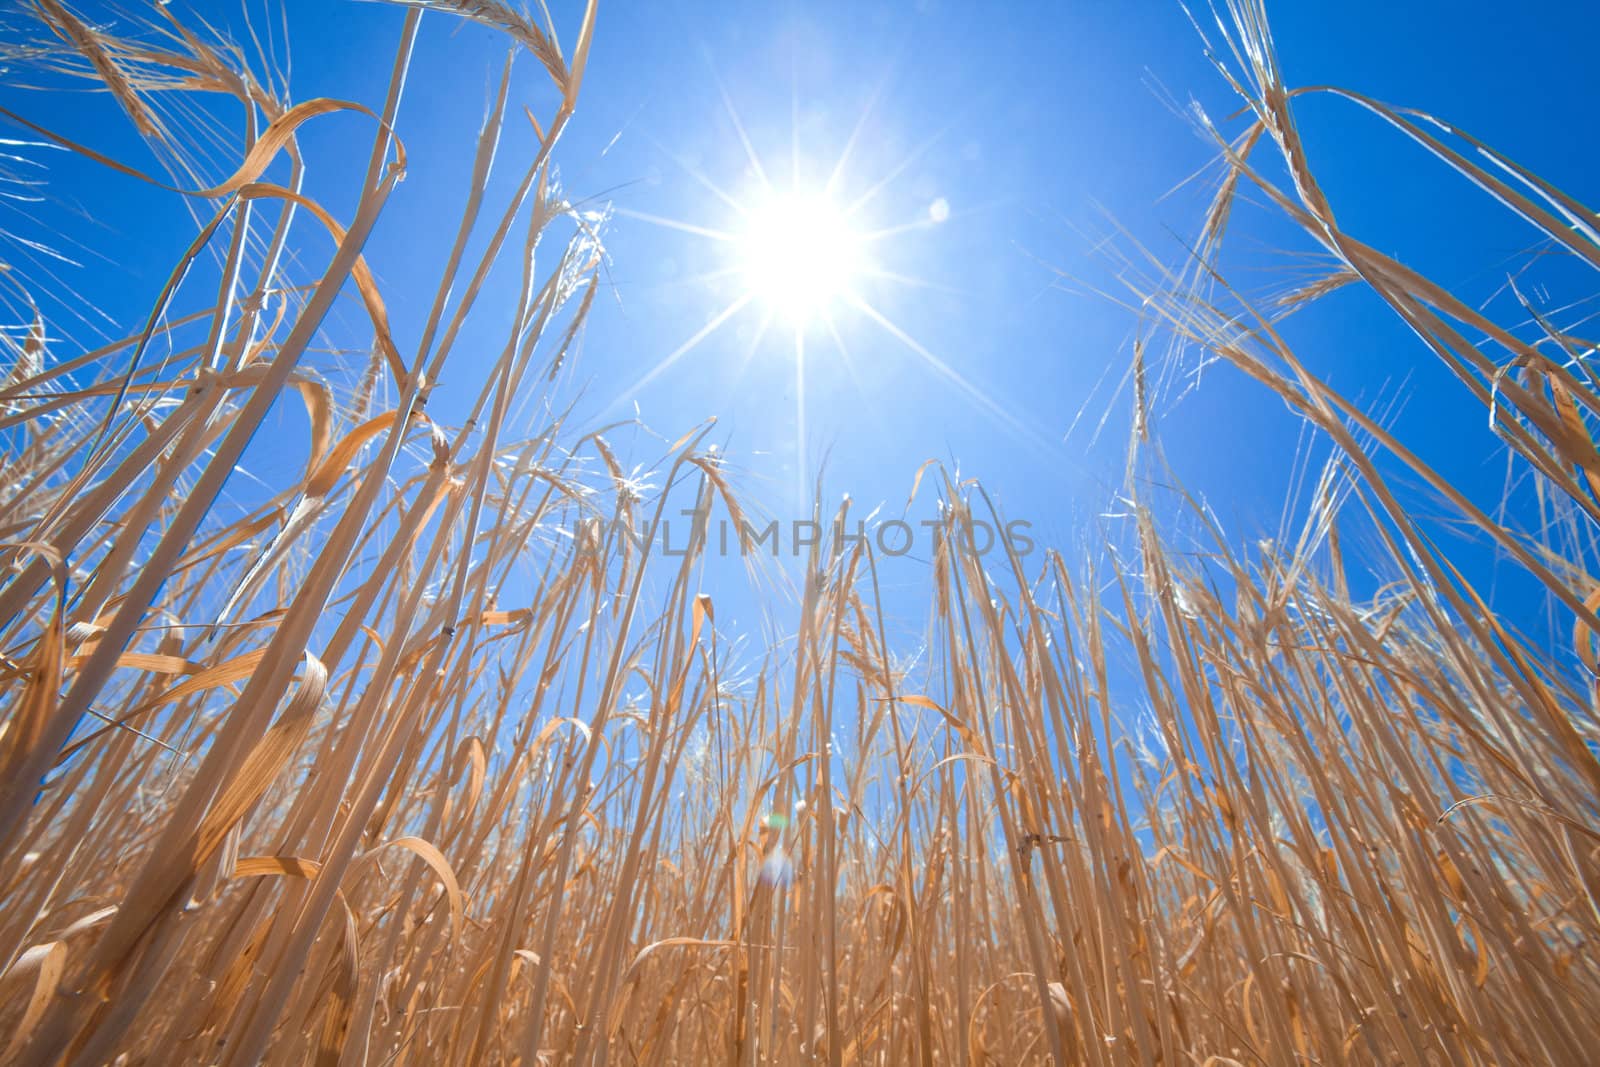 growing wheat and sun in the sky